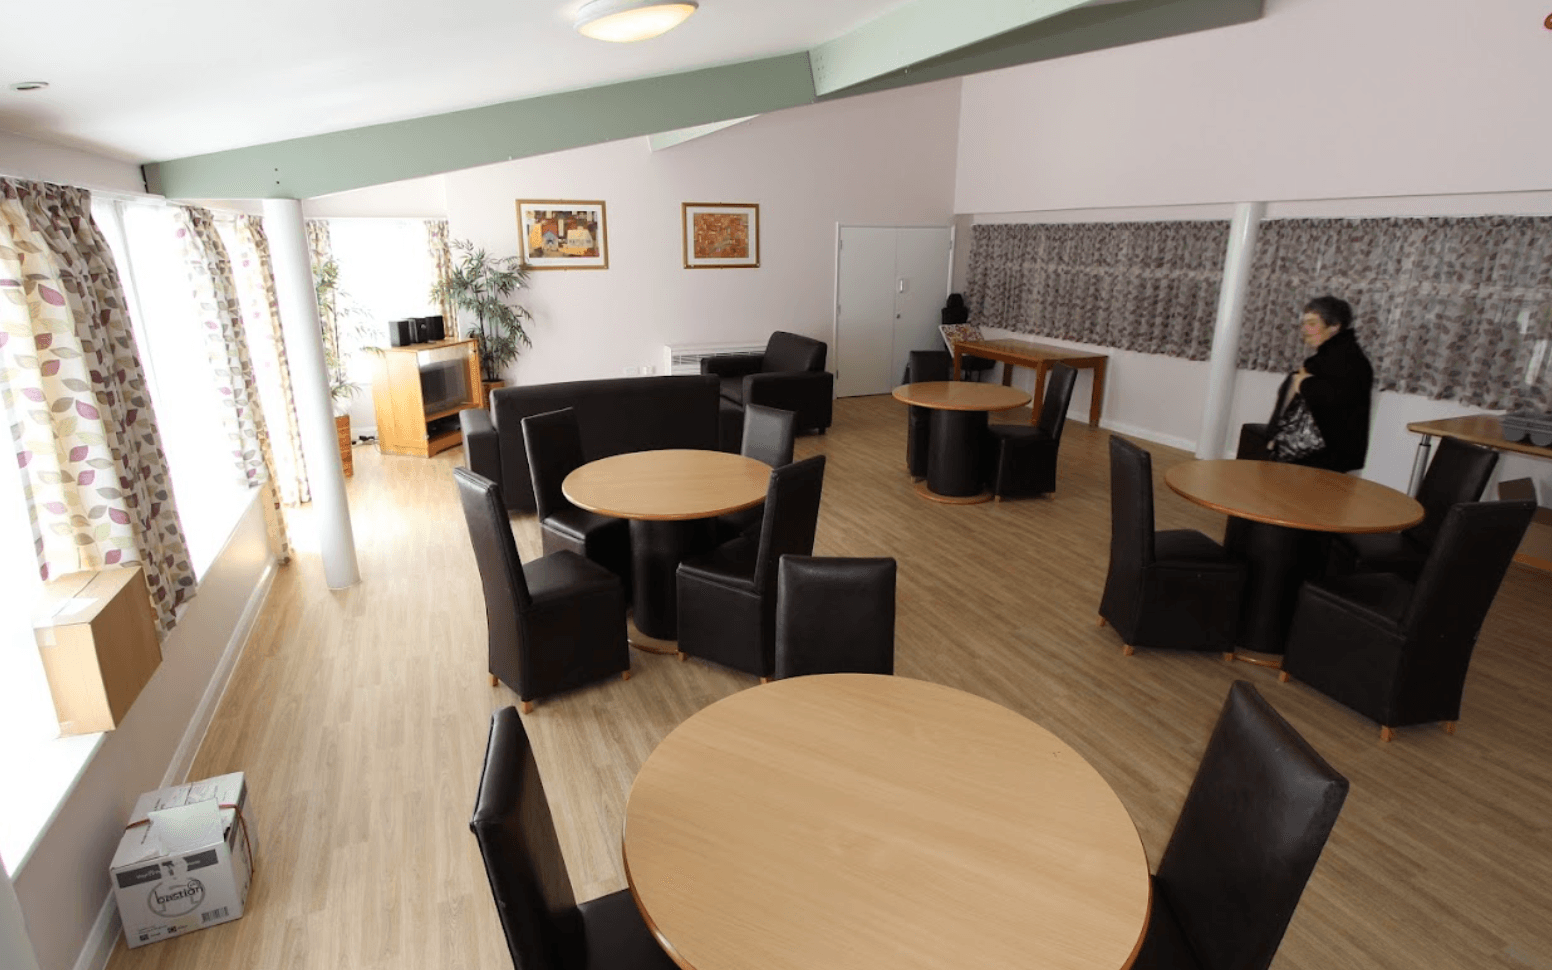 Shaw Healthcare - Wood House care home 004